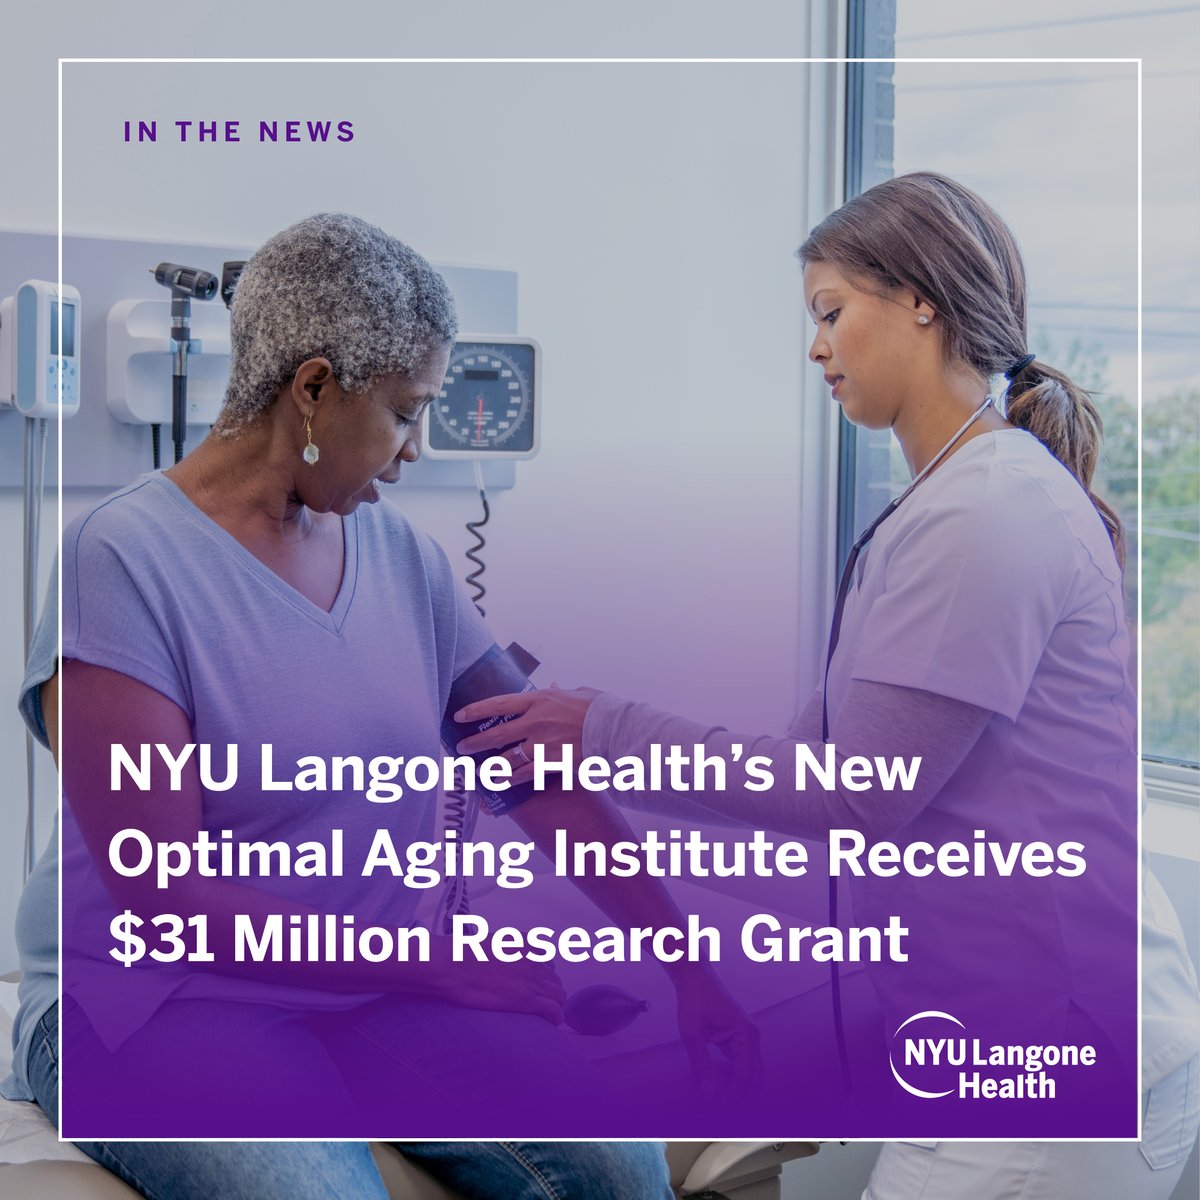 A new $31 million @NIH grant to NYU Langone’s Optimal Aging Institute helps continue work identifying the links between vascular risk factors and dementia in older adults. Learn more about the research: bit.ly/4b9aMw3